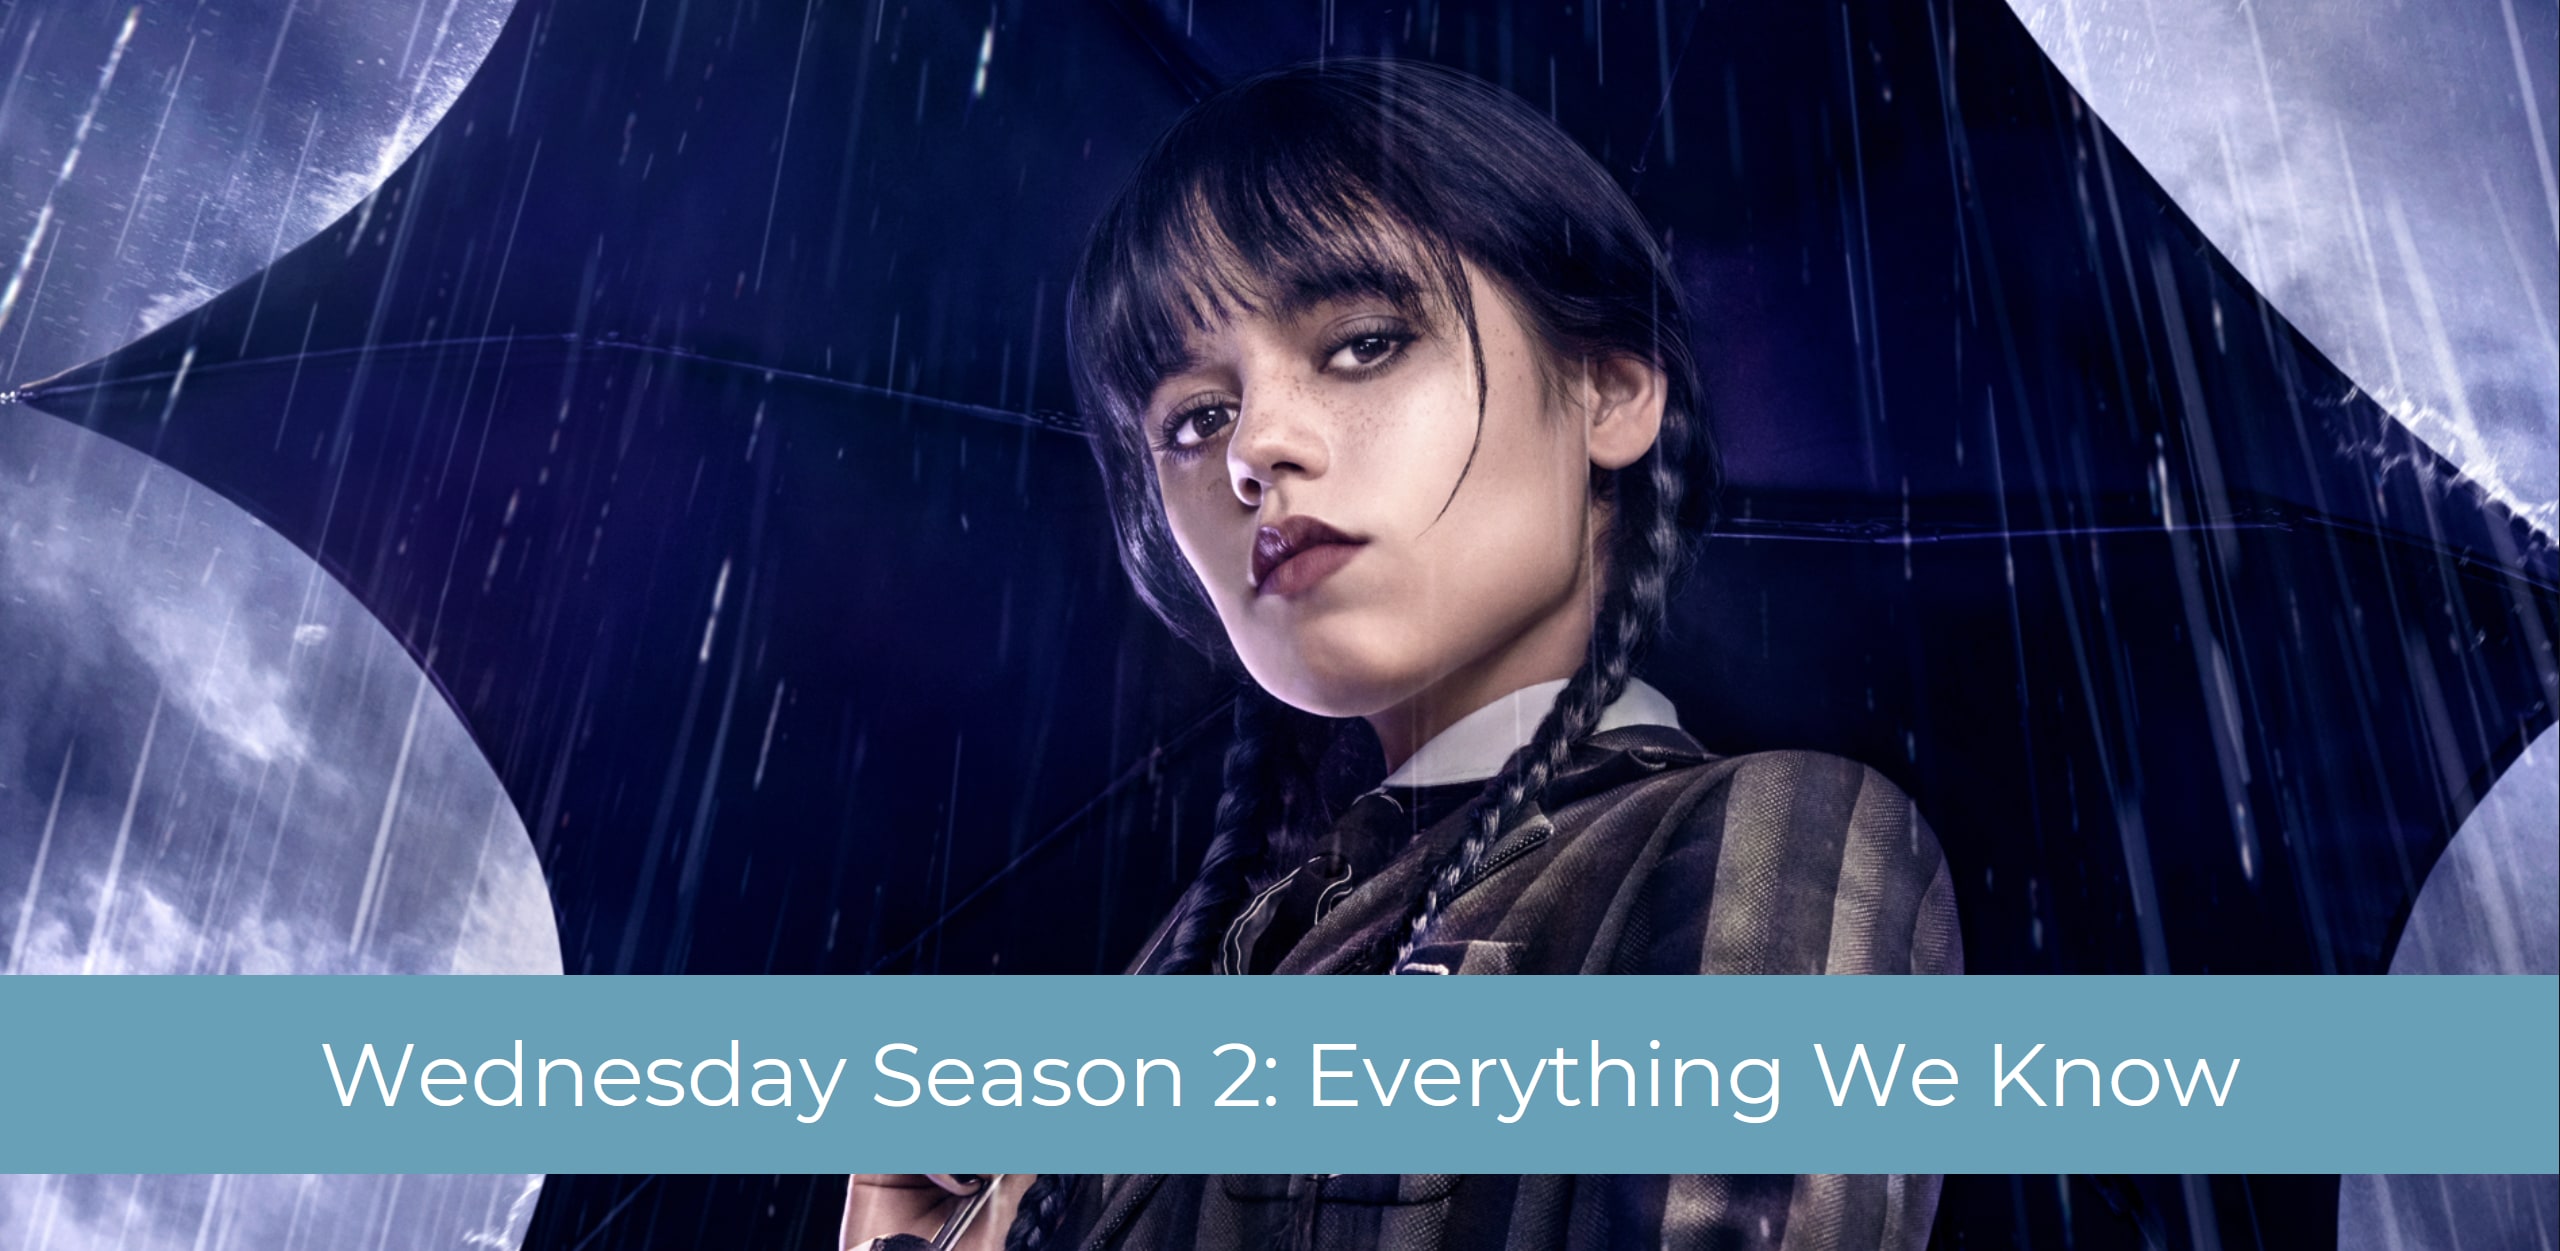 Wednesday Season 2: Release, Cast & Everything We Know